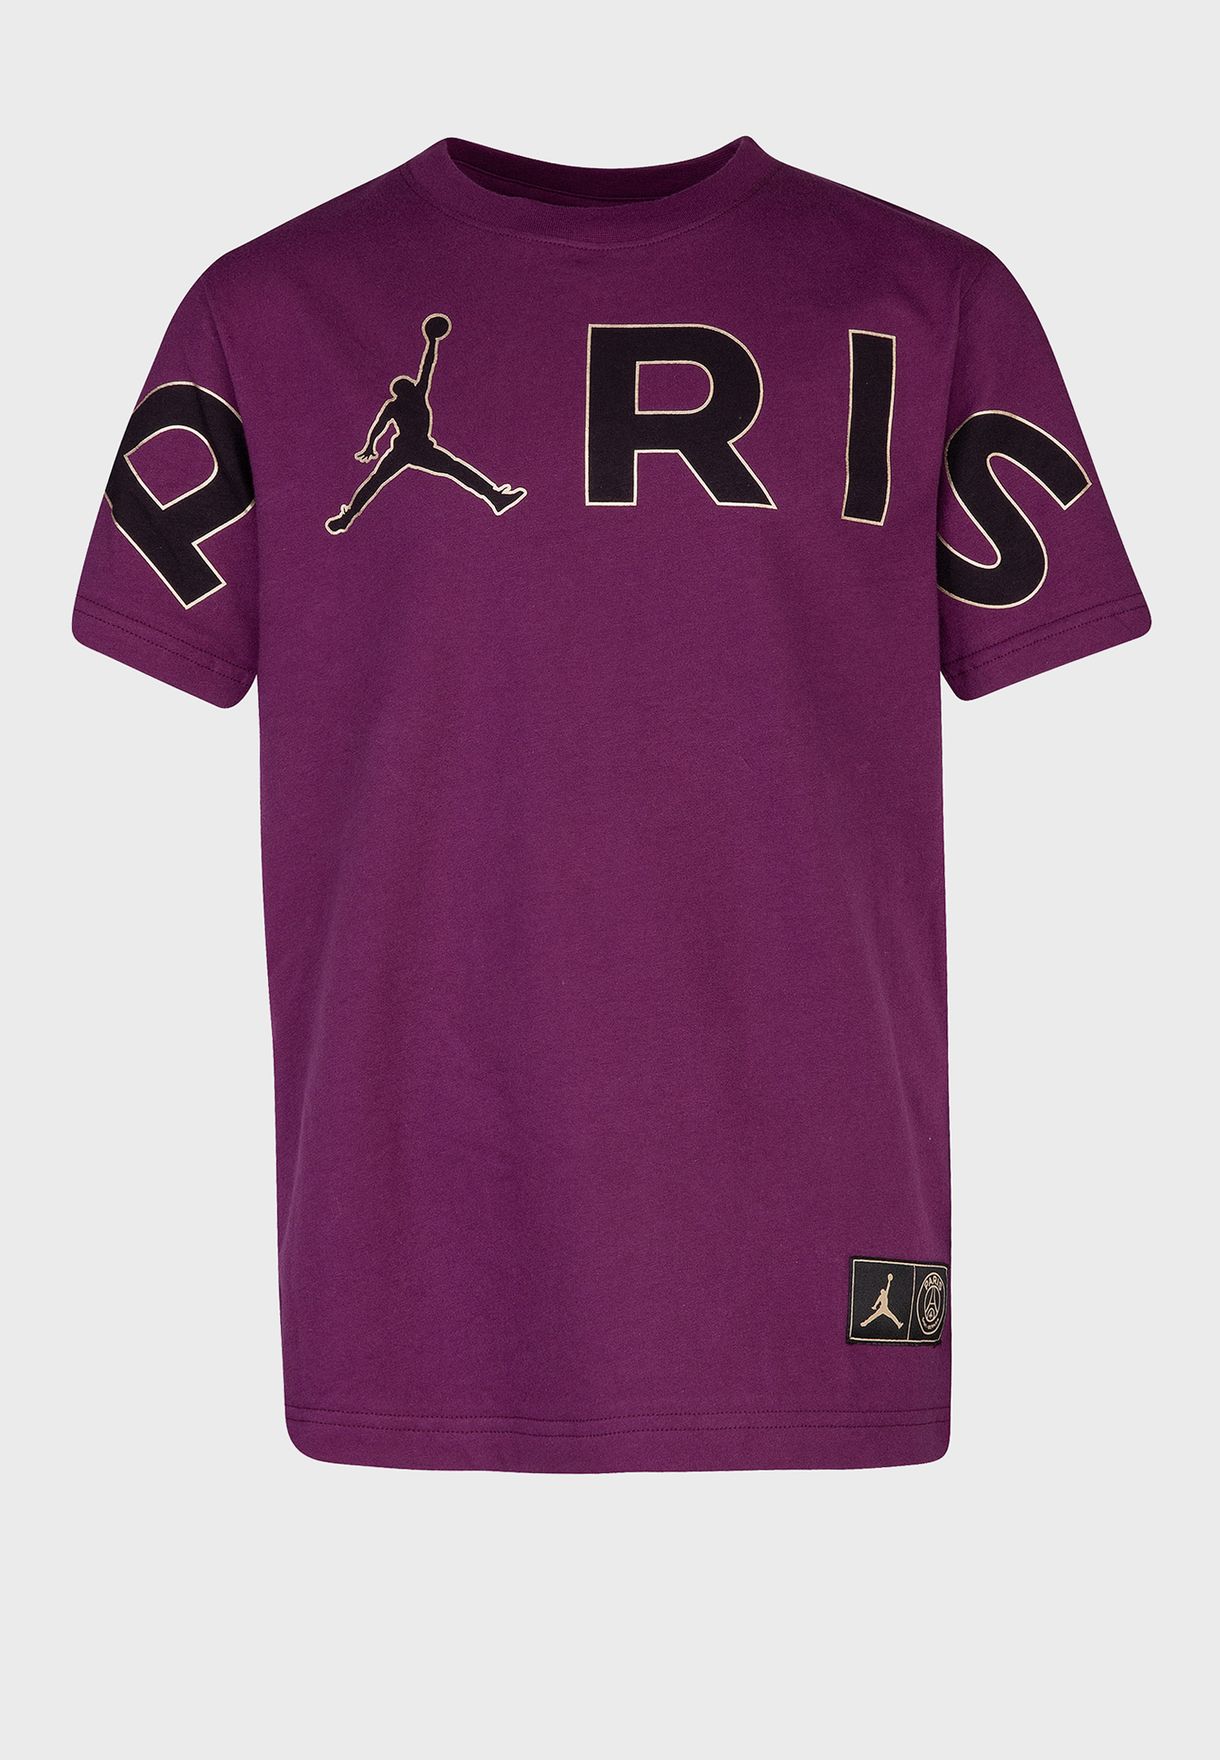 youth psg jersey